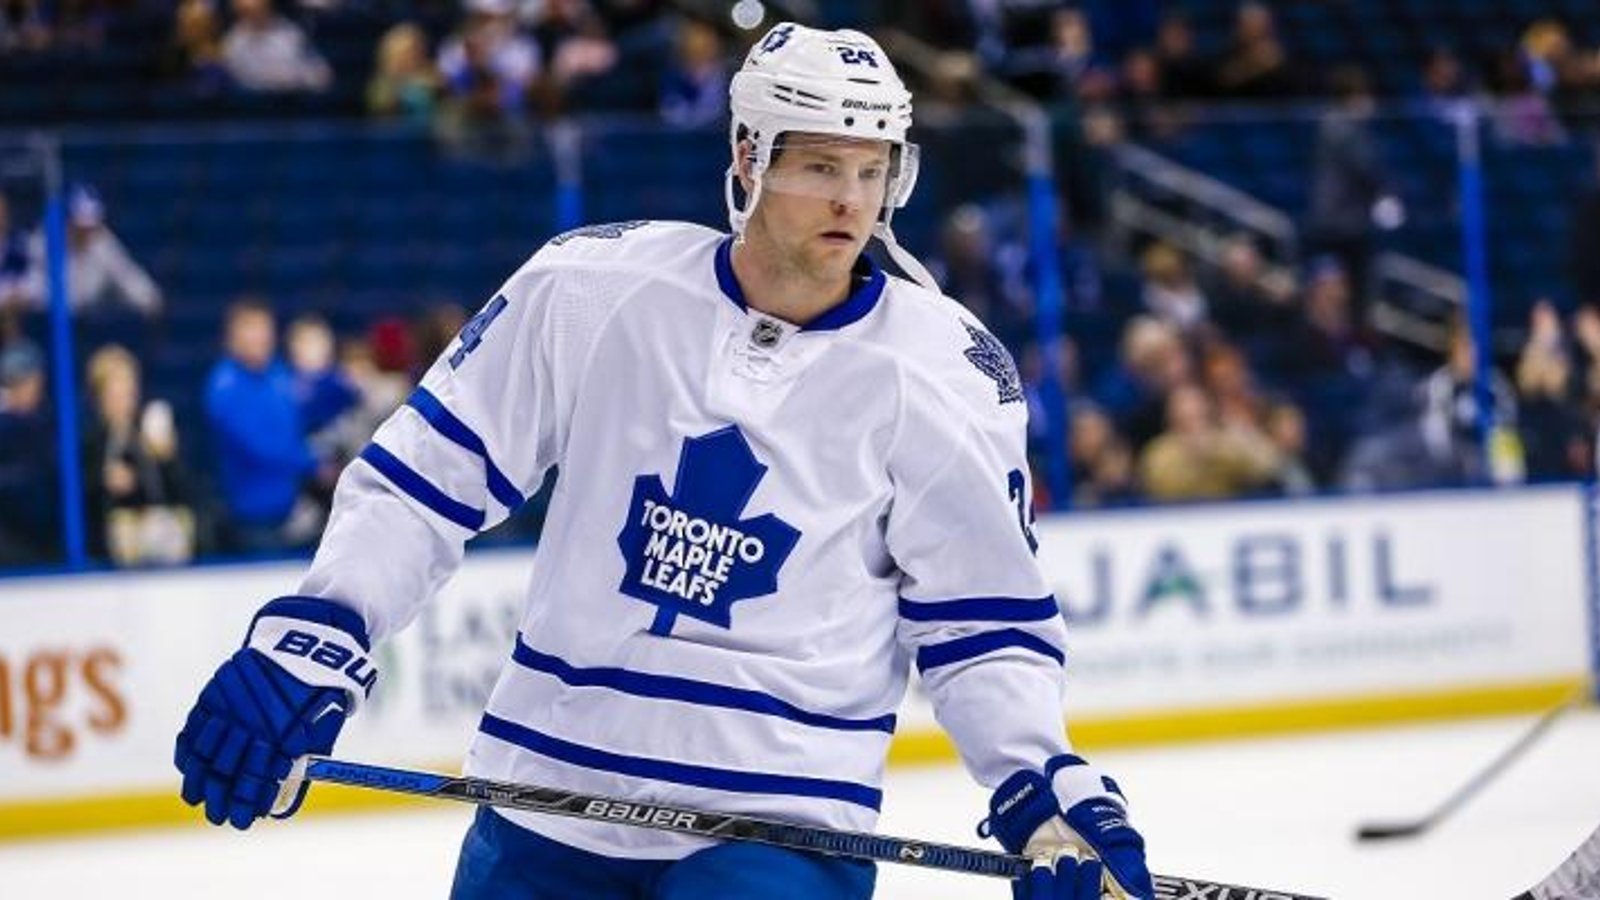 Report: Leafs place young forward on waivers 3 days before arbitration.